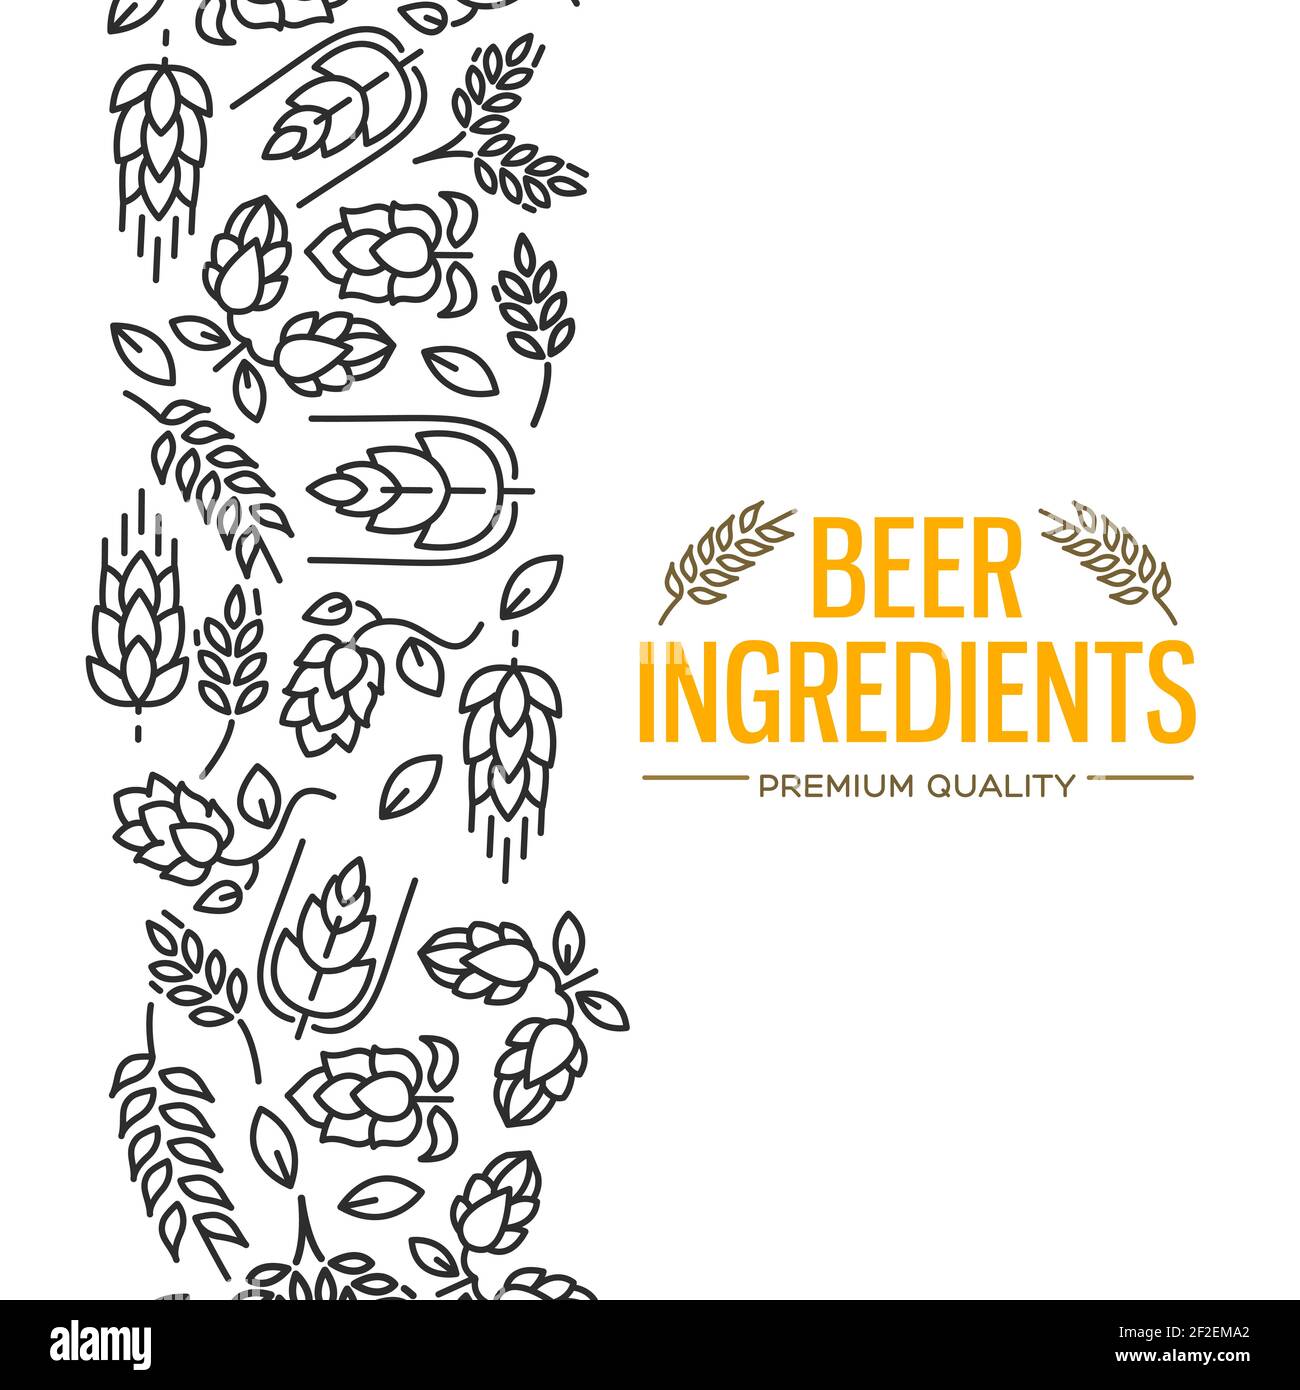 Stylish design card with images to the left of the yellow text beer ingredients of flowers, twig of hops, blossom, malt vector illustration Stock Vector